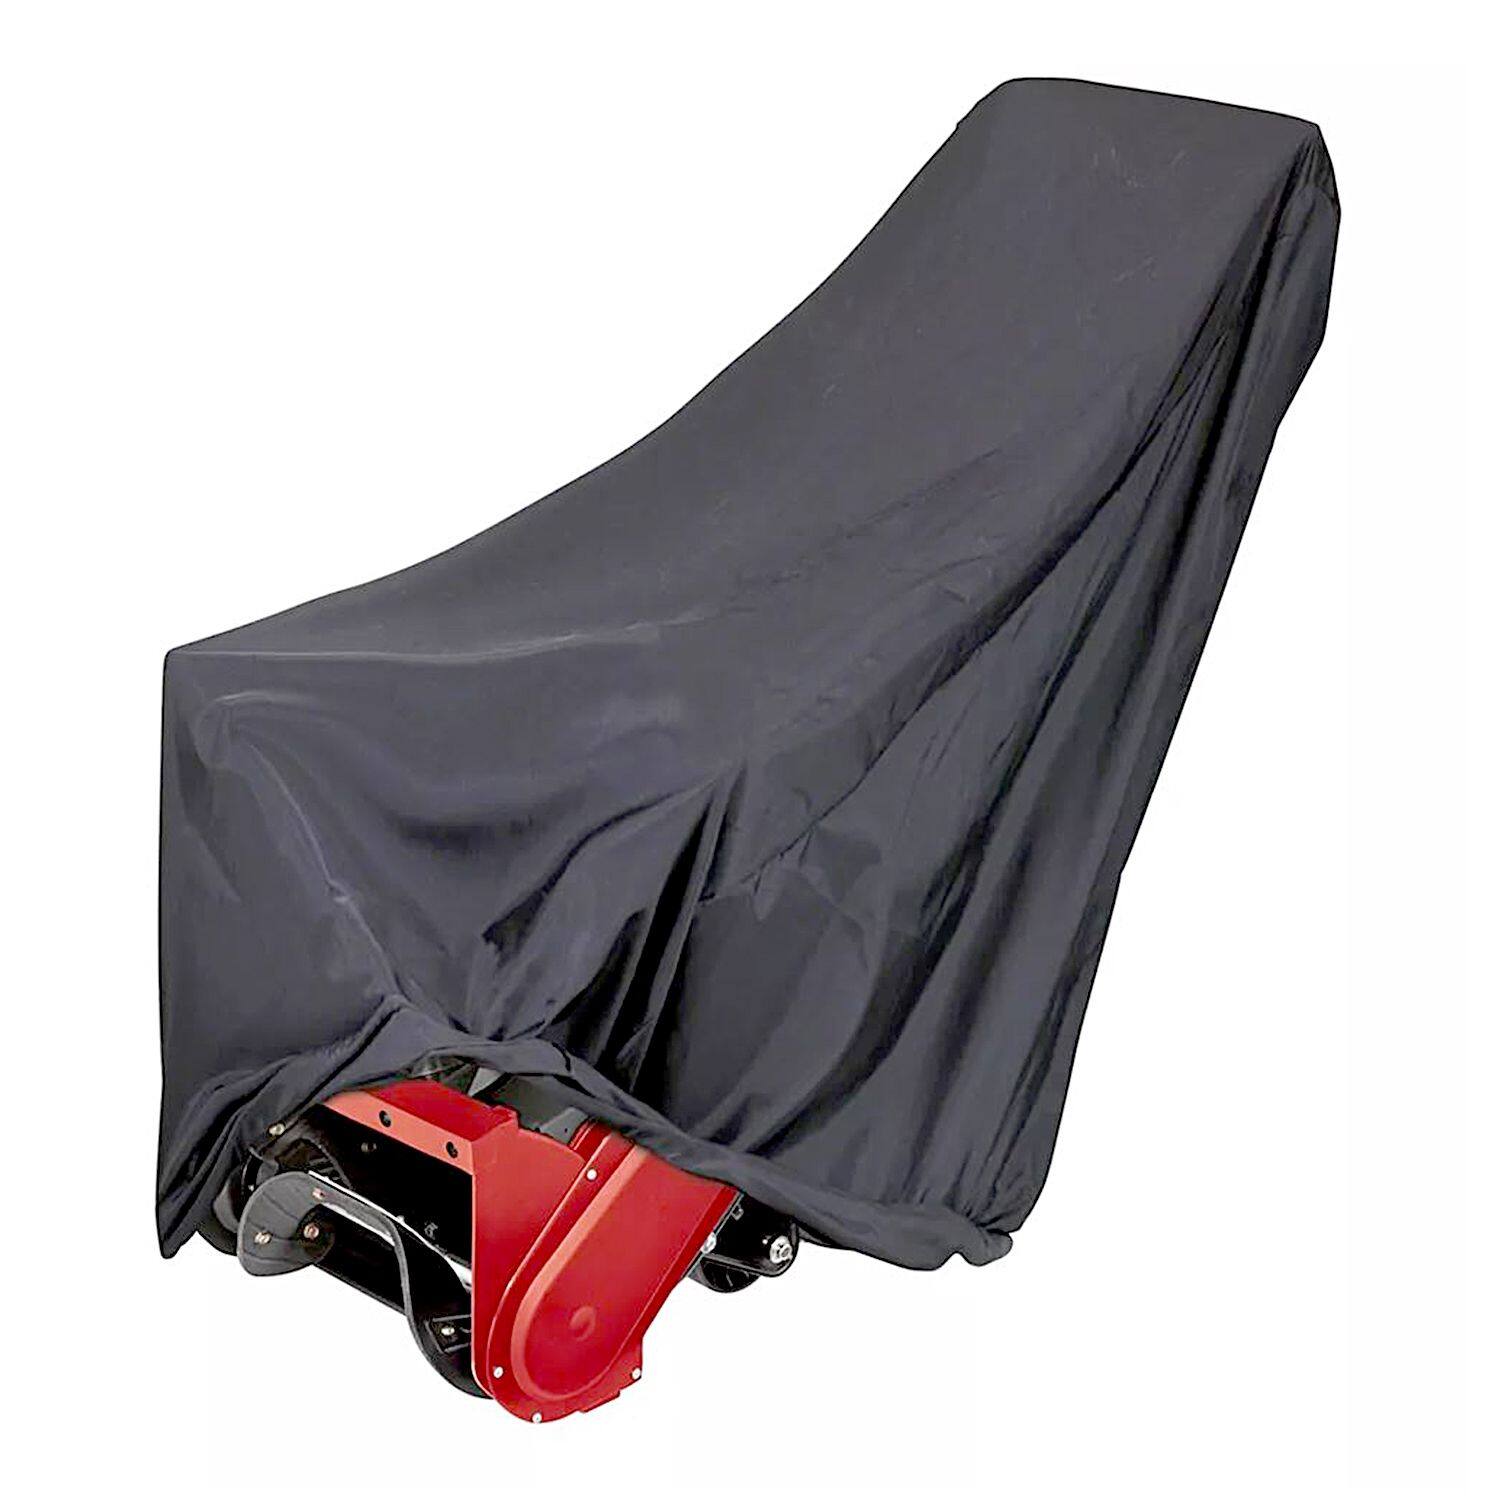 Certified Universal Snowblower Cover, fits most single stage snow-throwers  up to 22